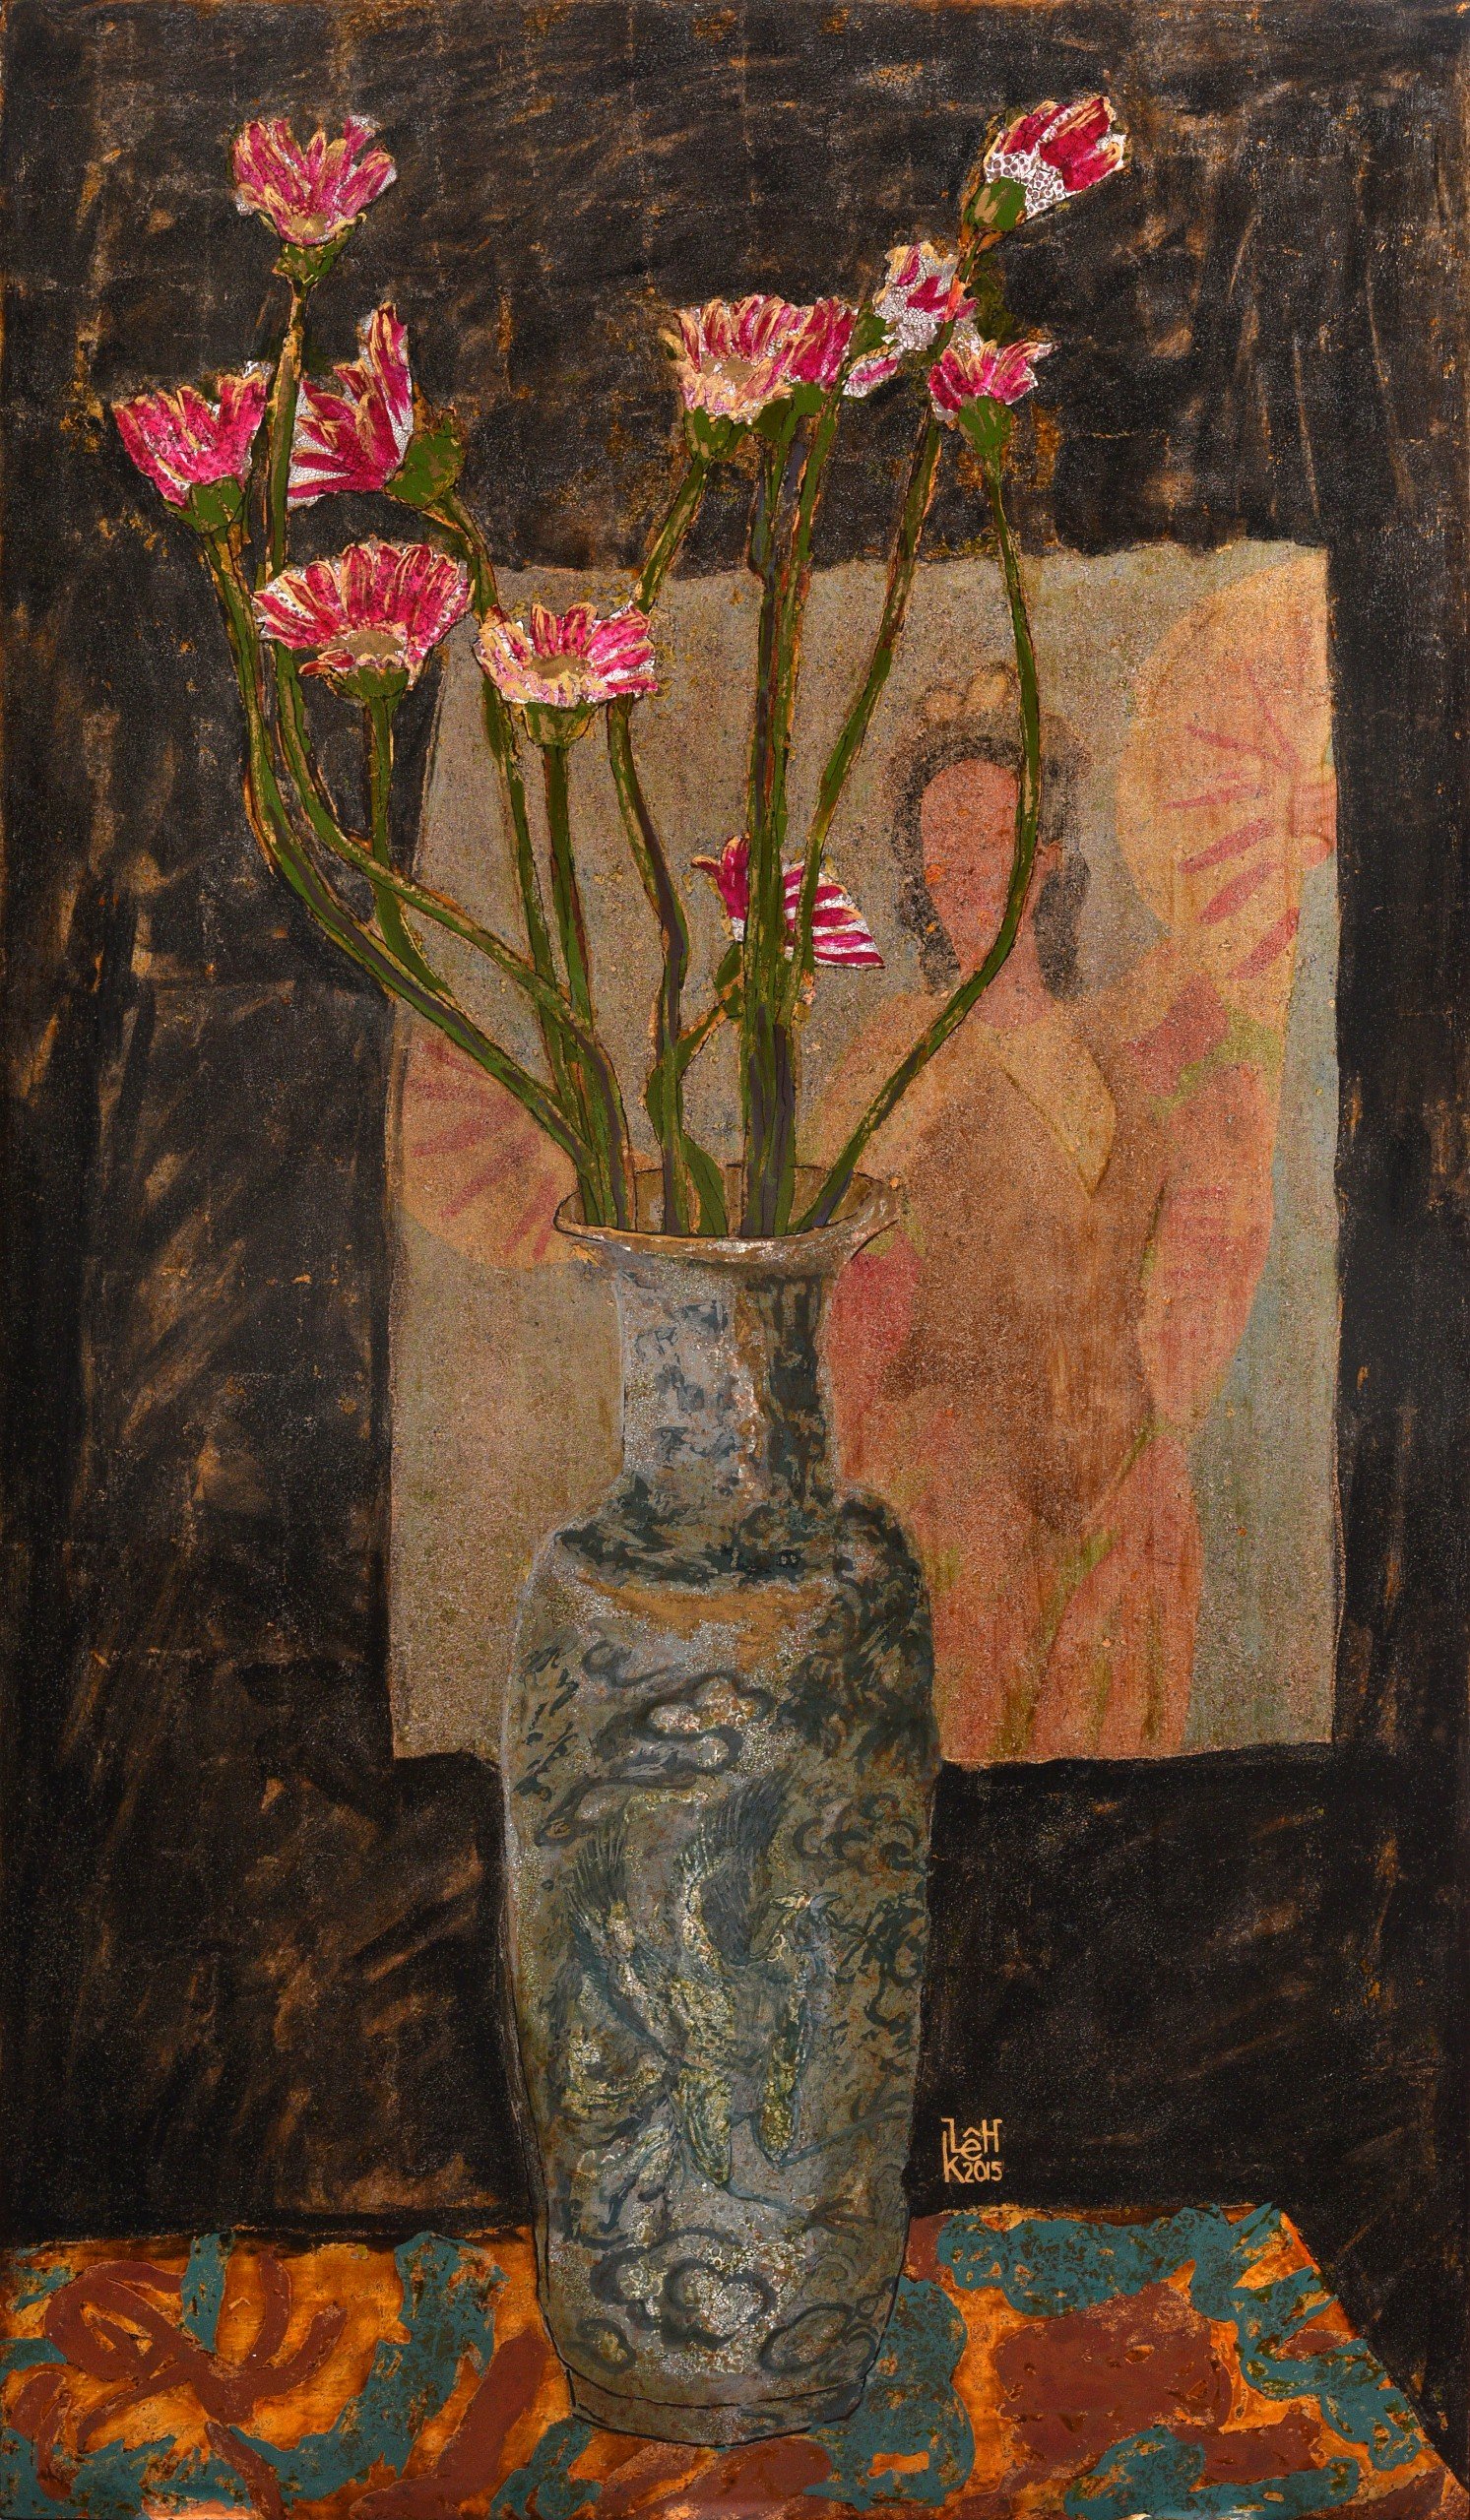 Gerbera Still Life - Vietnamese Lacquer Painting by Artist Le Khanh Hieu